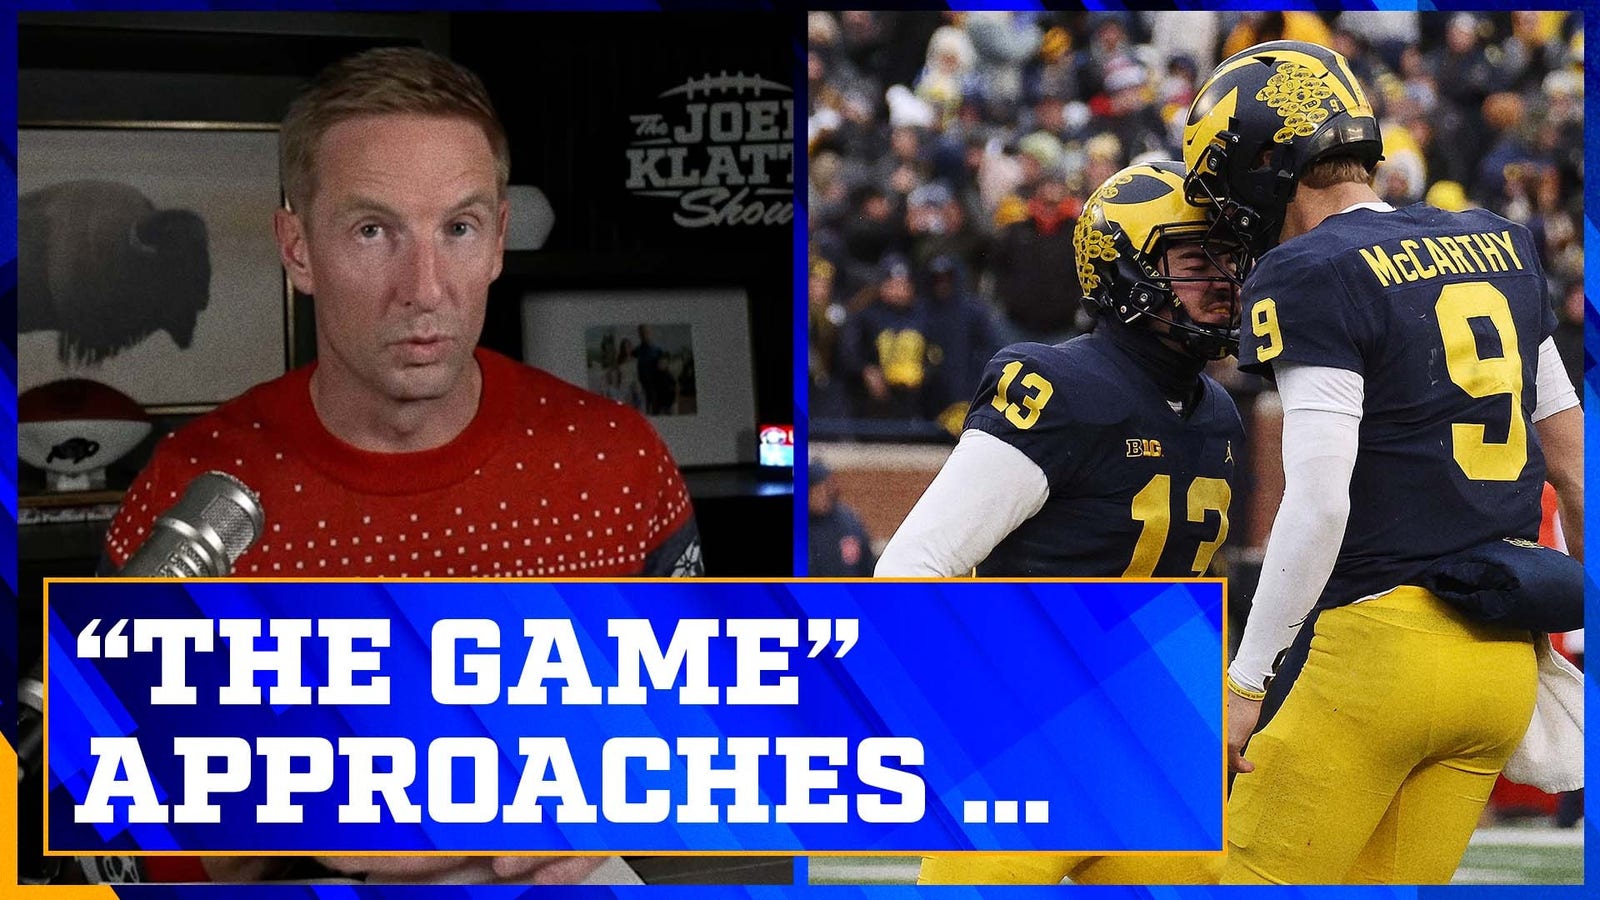 Ohio State and Michigan 11-0 heading into 'The Game'